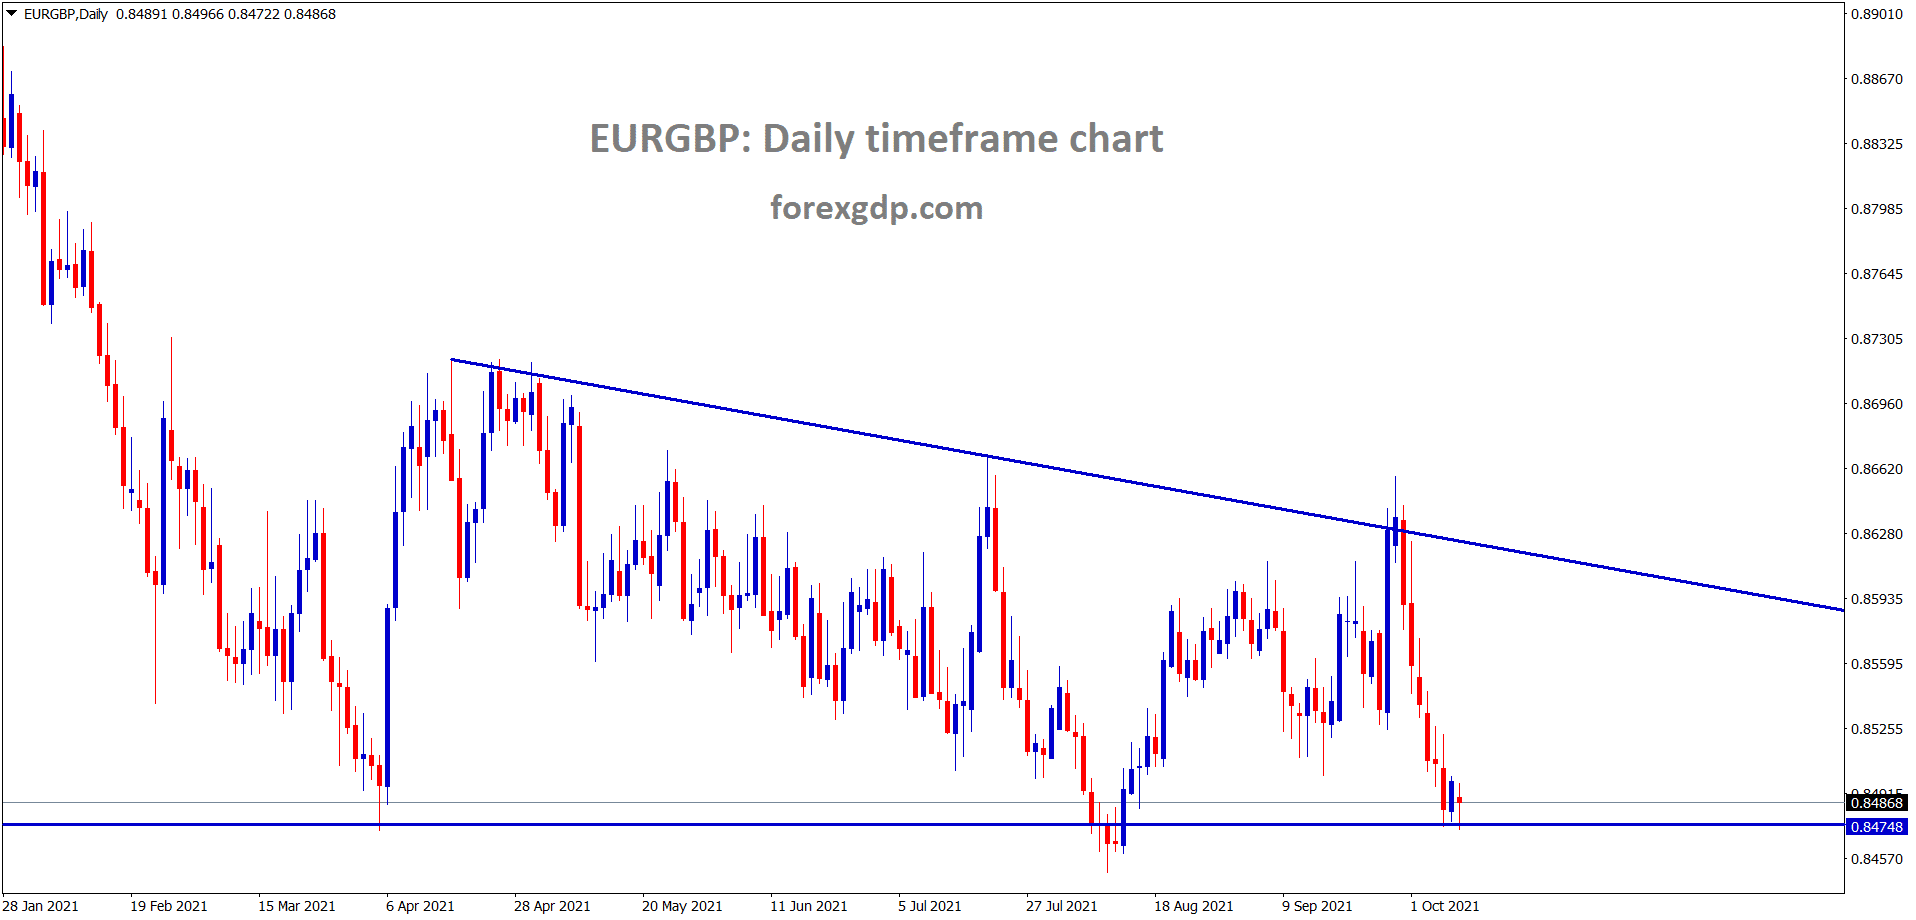 EURGBP is still standing at the low level of the descending triangle pattern